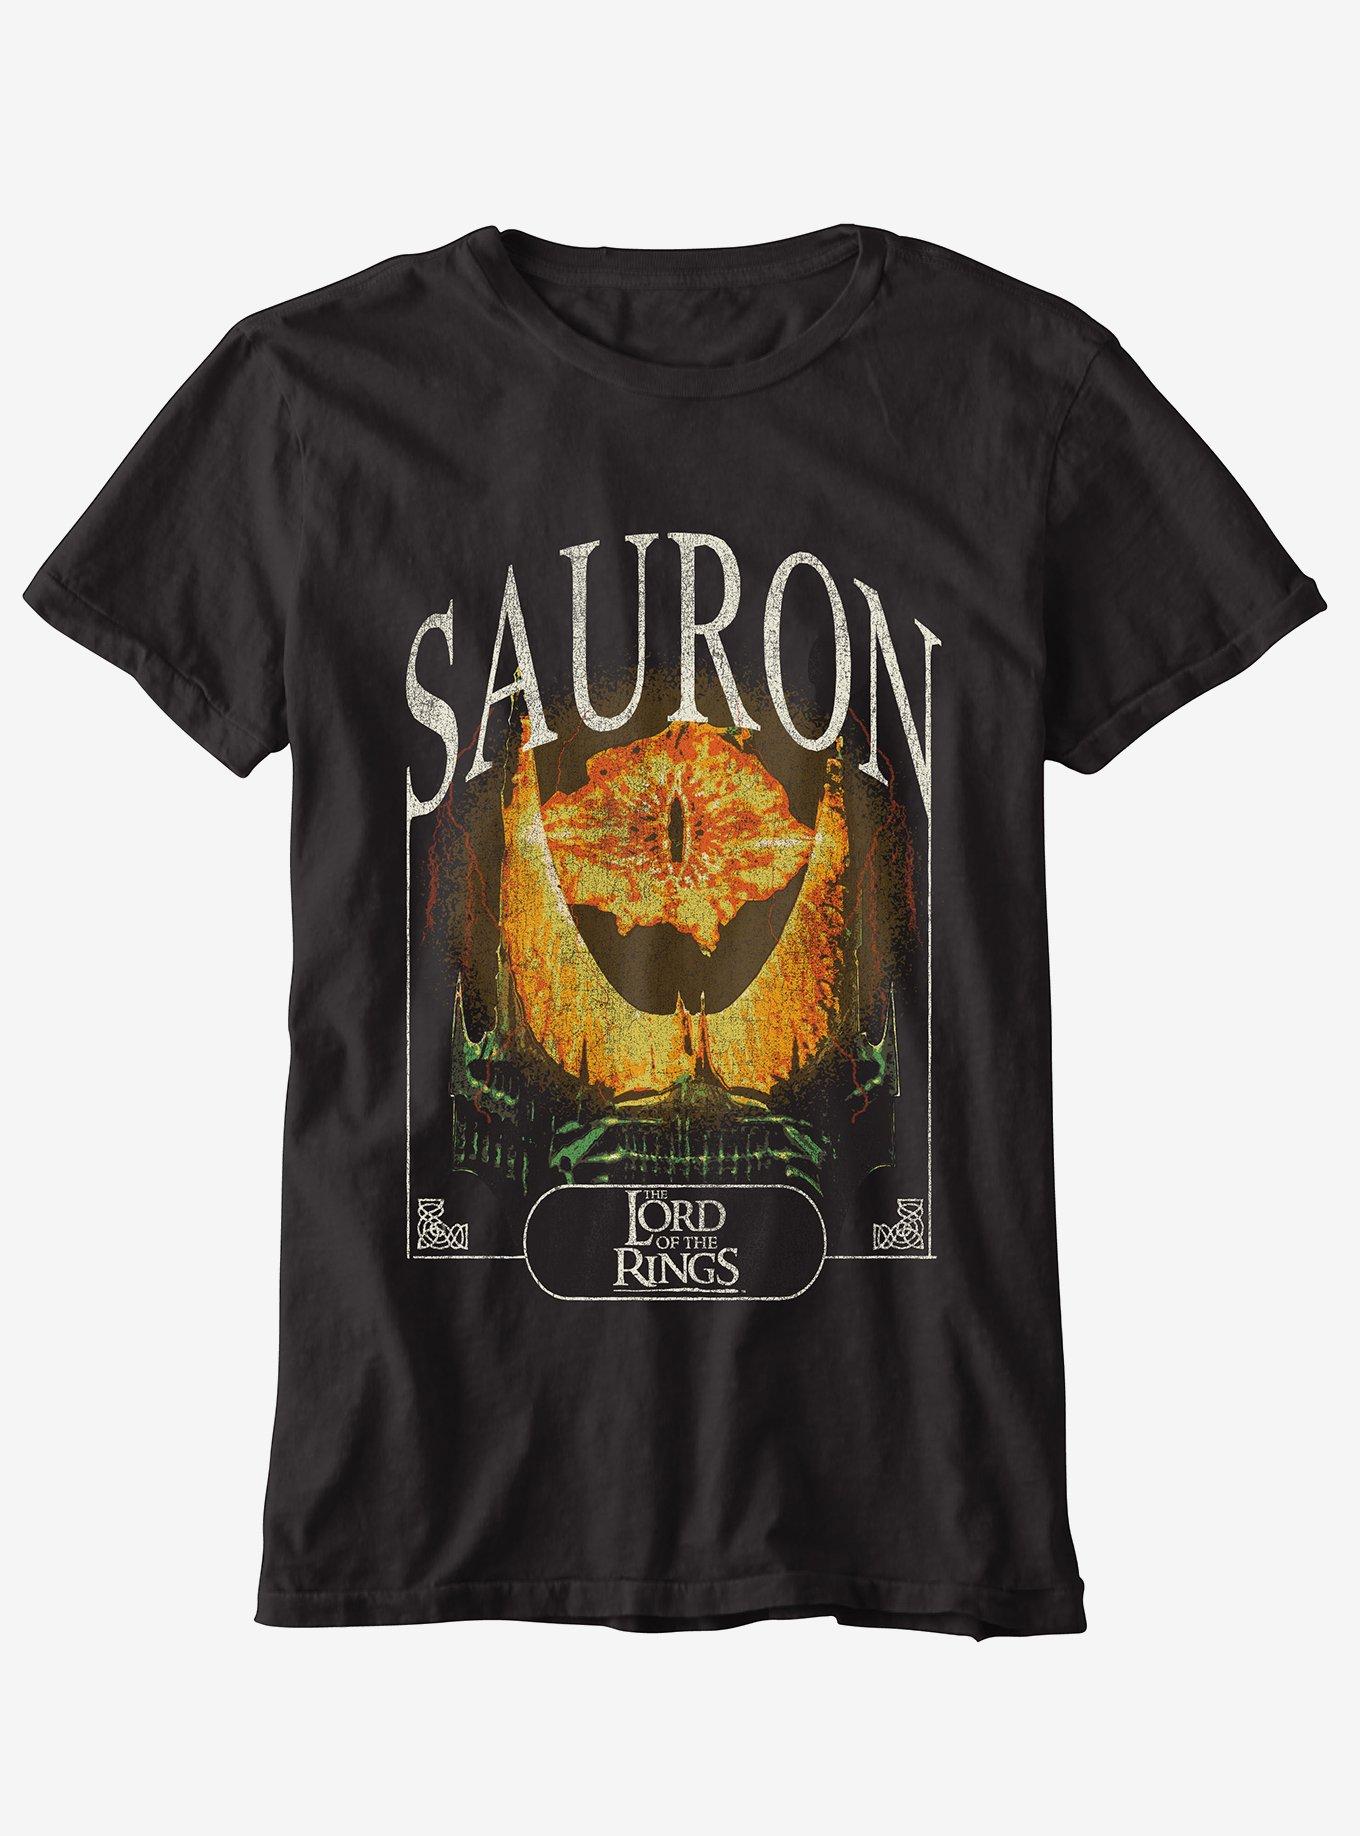 Lord Of The Rings Eye Of Sauron Boyfriend Fit Girls T-Shirt Plus Size, MULTI, hi-res